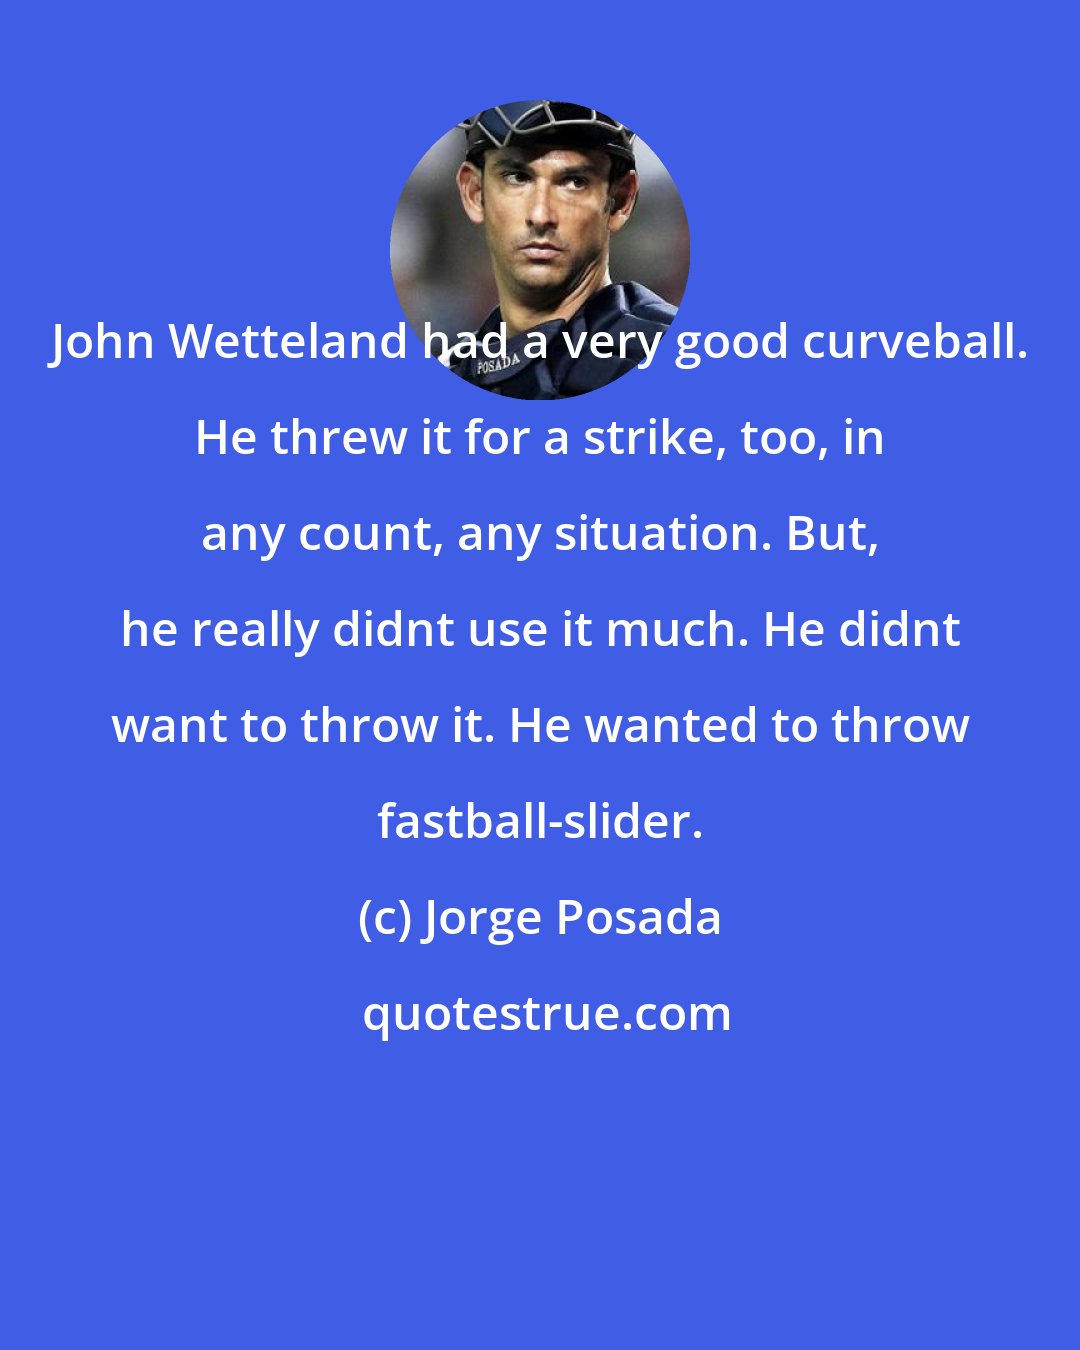 Jorge Posada: John Wetteland had a very good curveball. He threw it for a strike, too, in any count, any situation. But, he really didnt use it much. He didnt want to throw it. He wanted to throw fastball-slider.